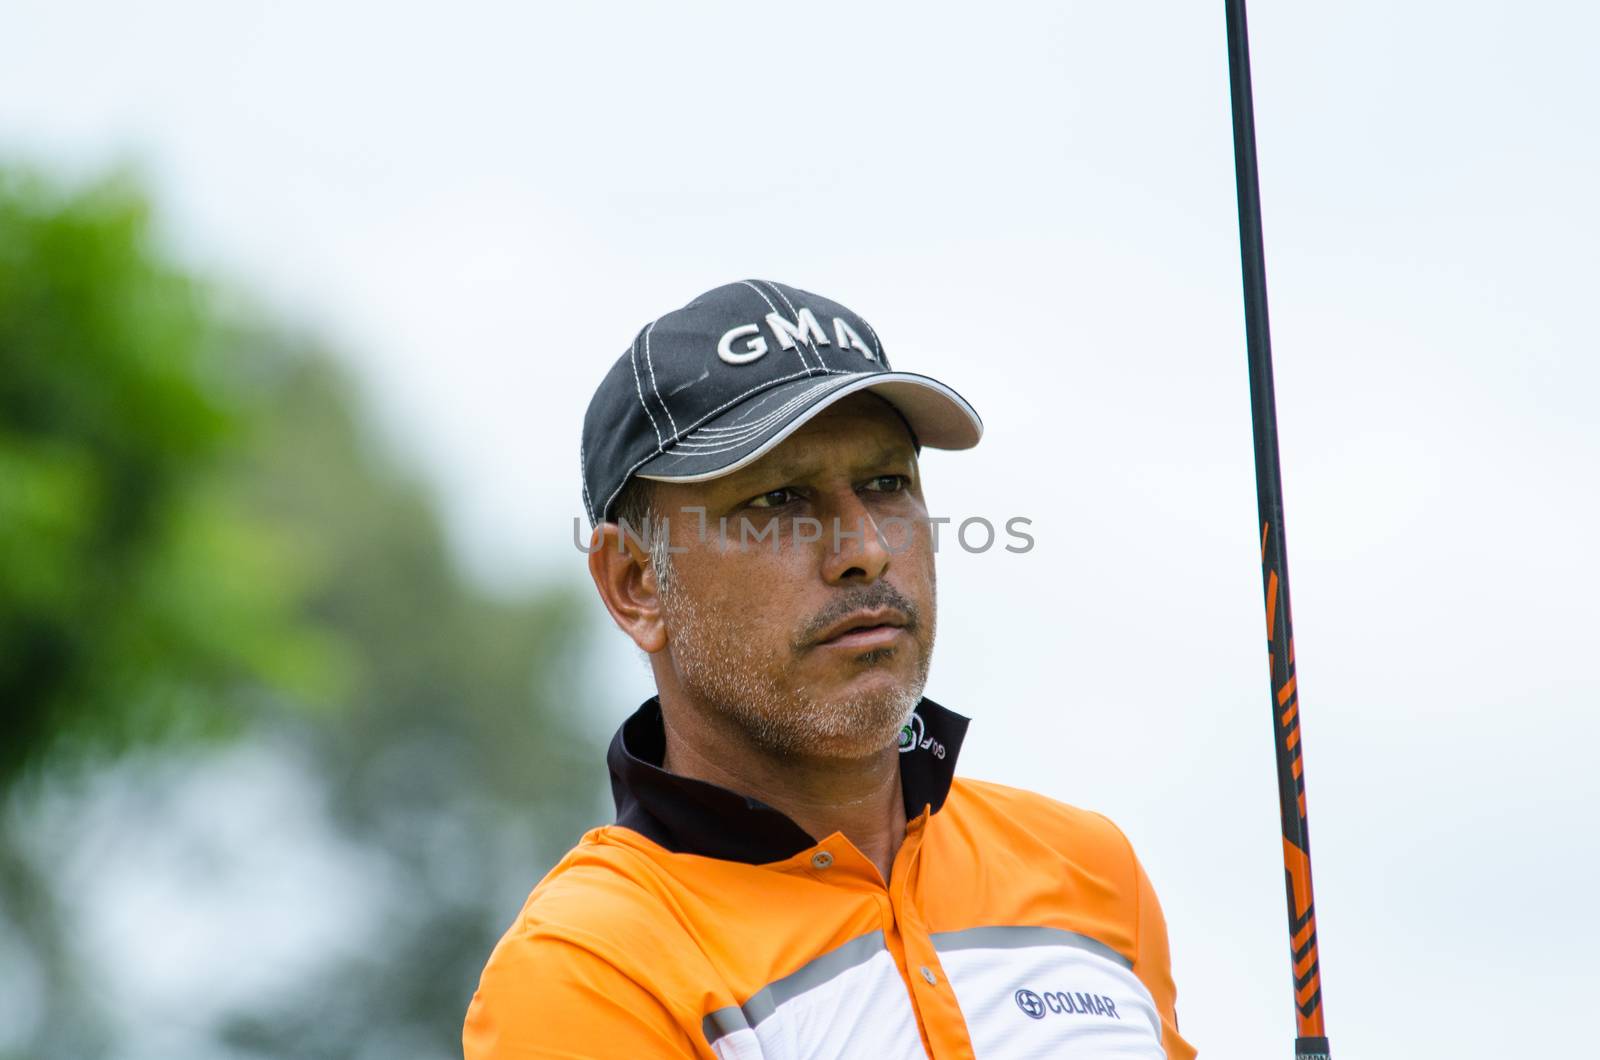 CHONBURI - JULY 31 : Jeev Milkha Singh of India in King's Cup 2016 at Phoenix Gold Golf & Country Club Pattaya on July 31, 2016 in Chonburi, Thailand.